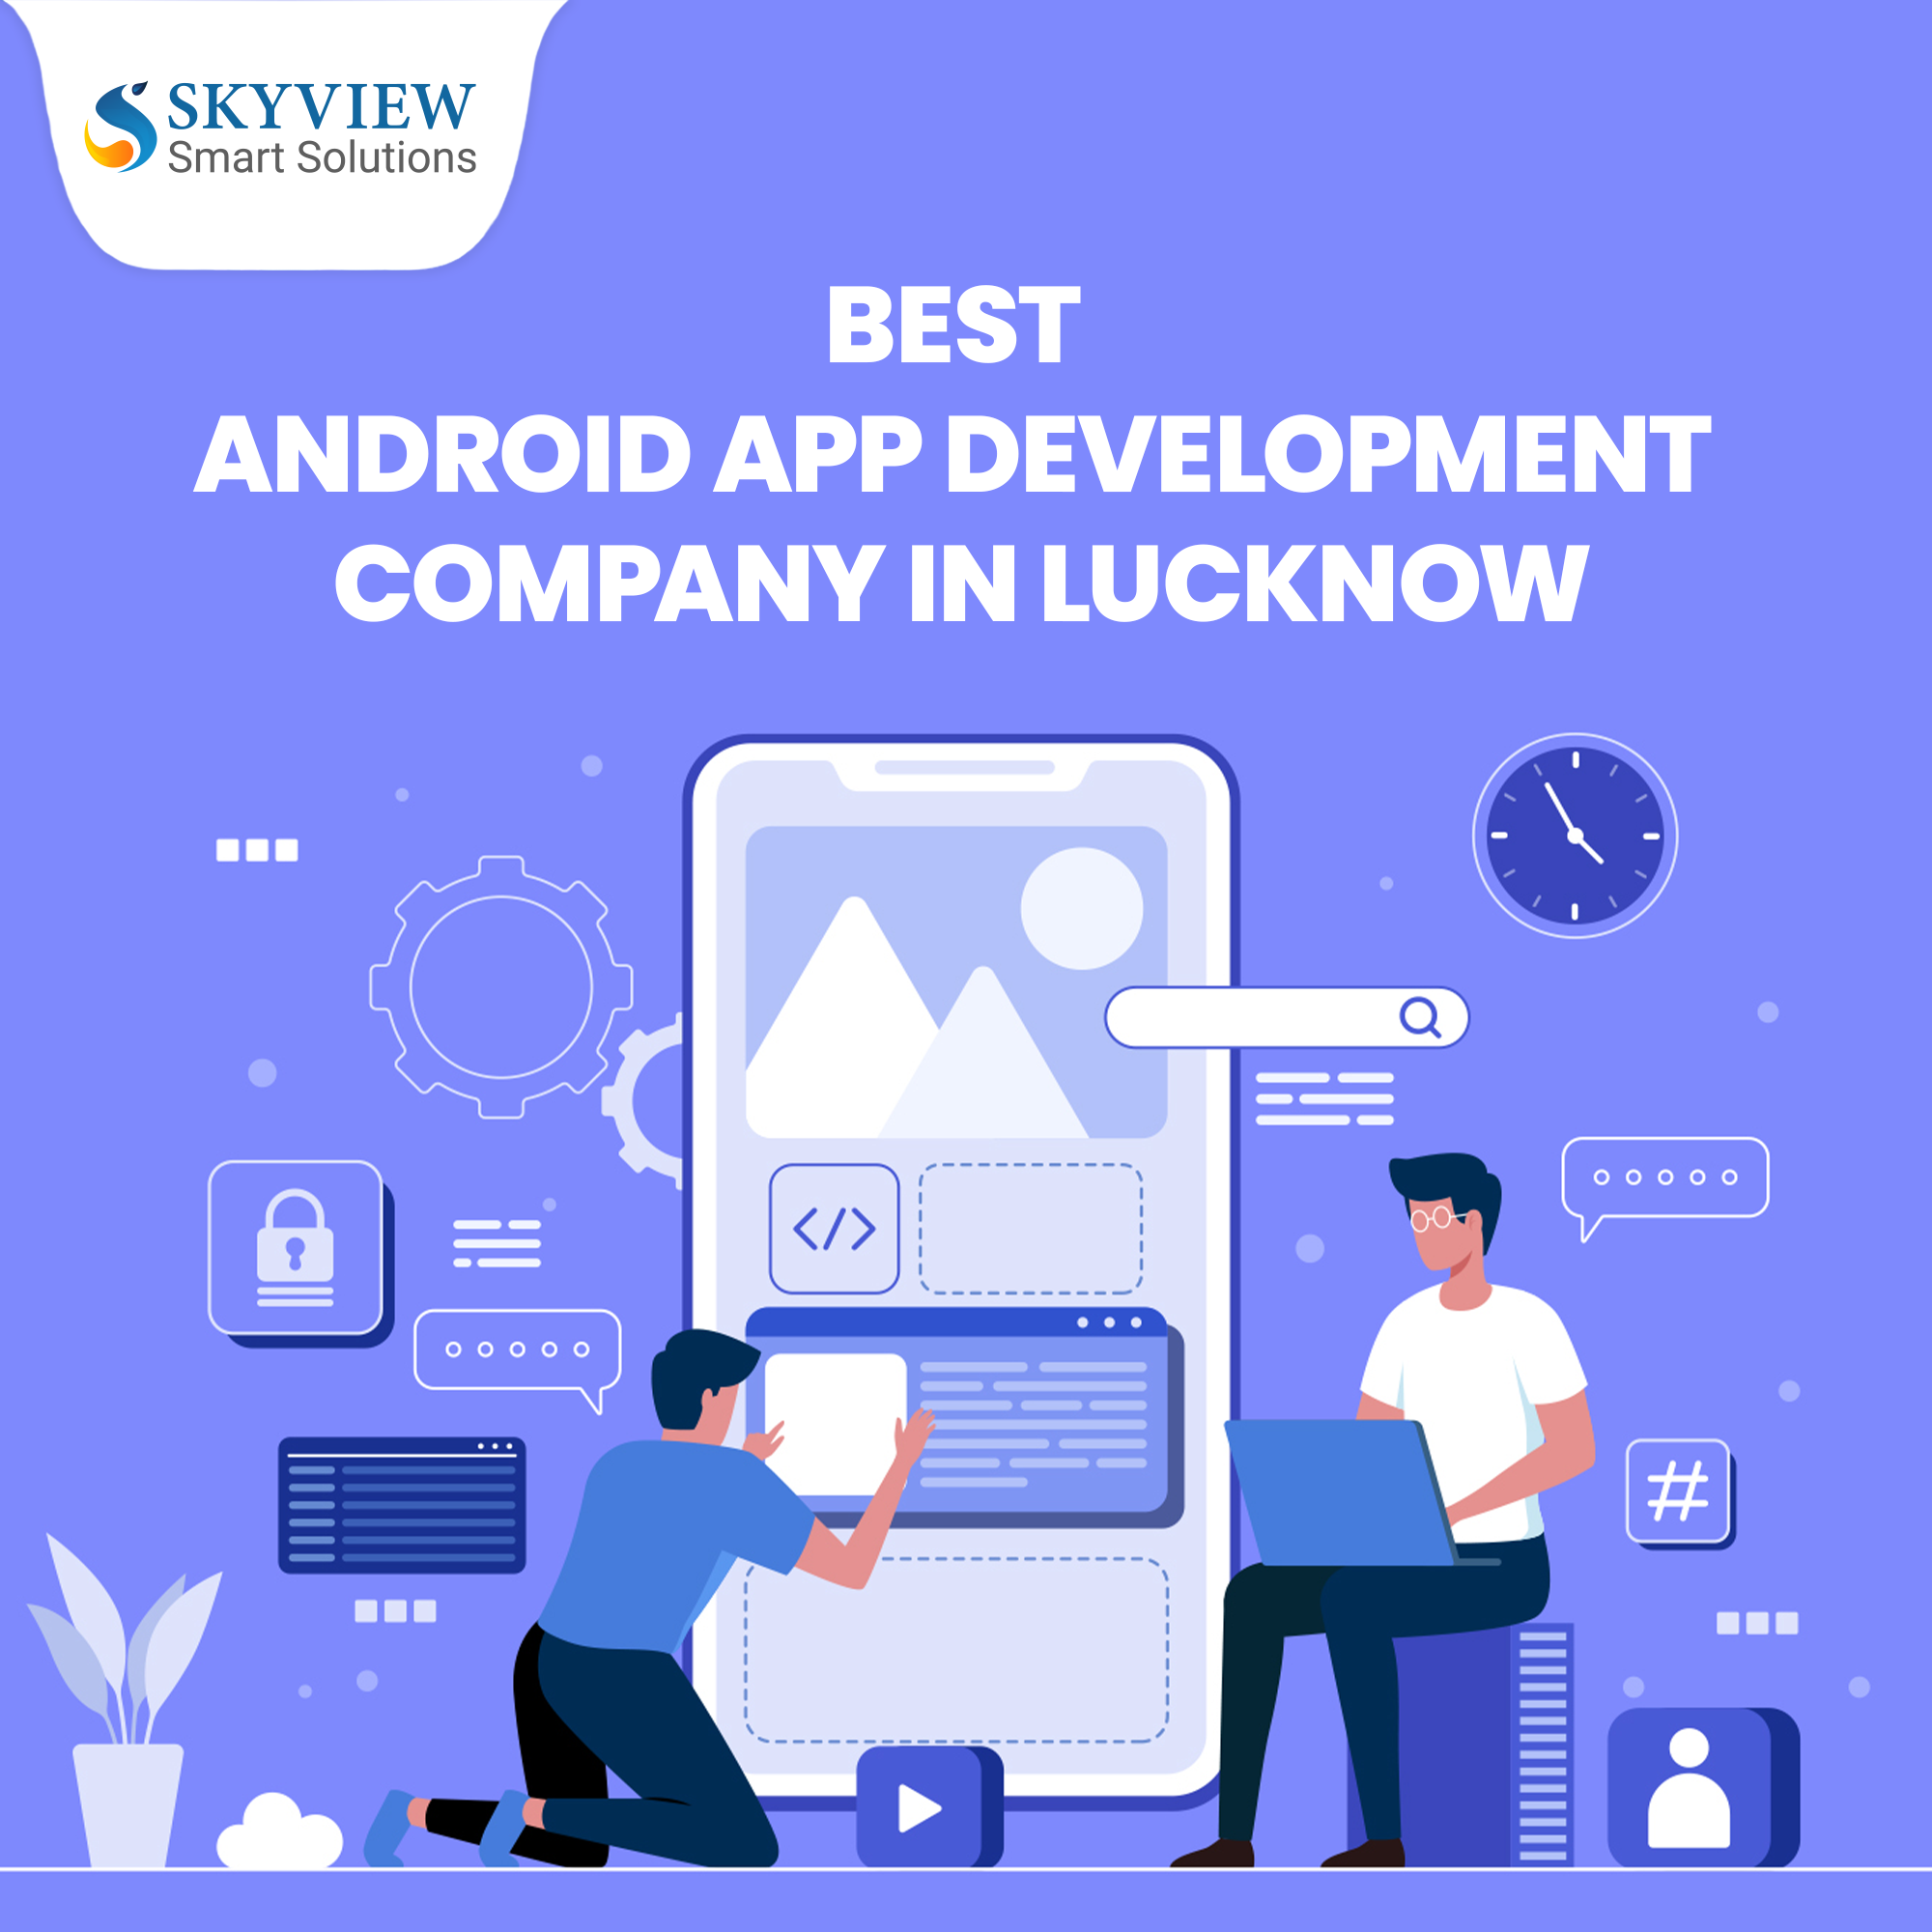 Best Android App Development Company in Lucknow